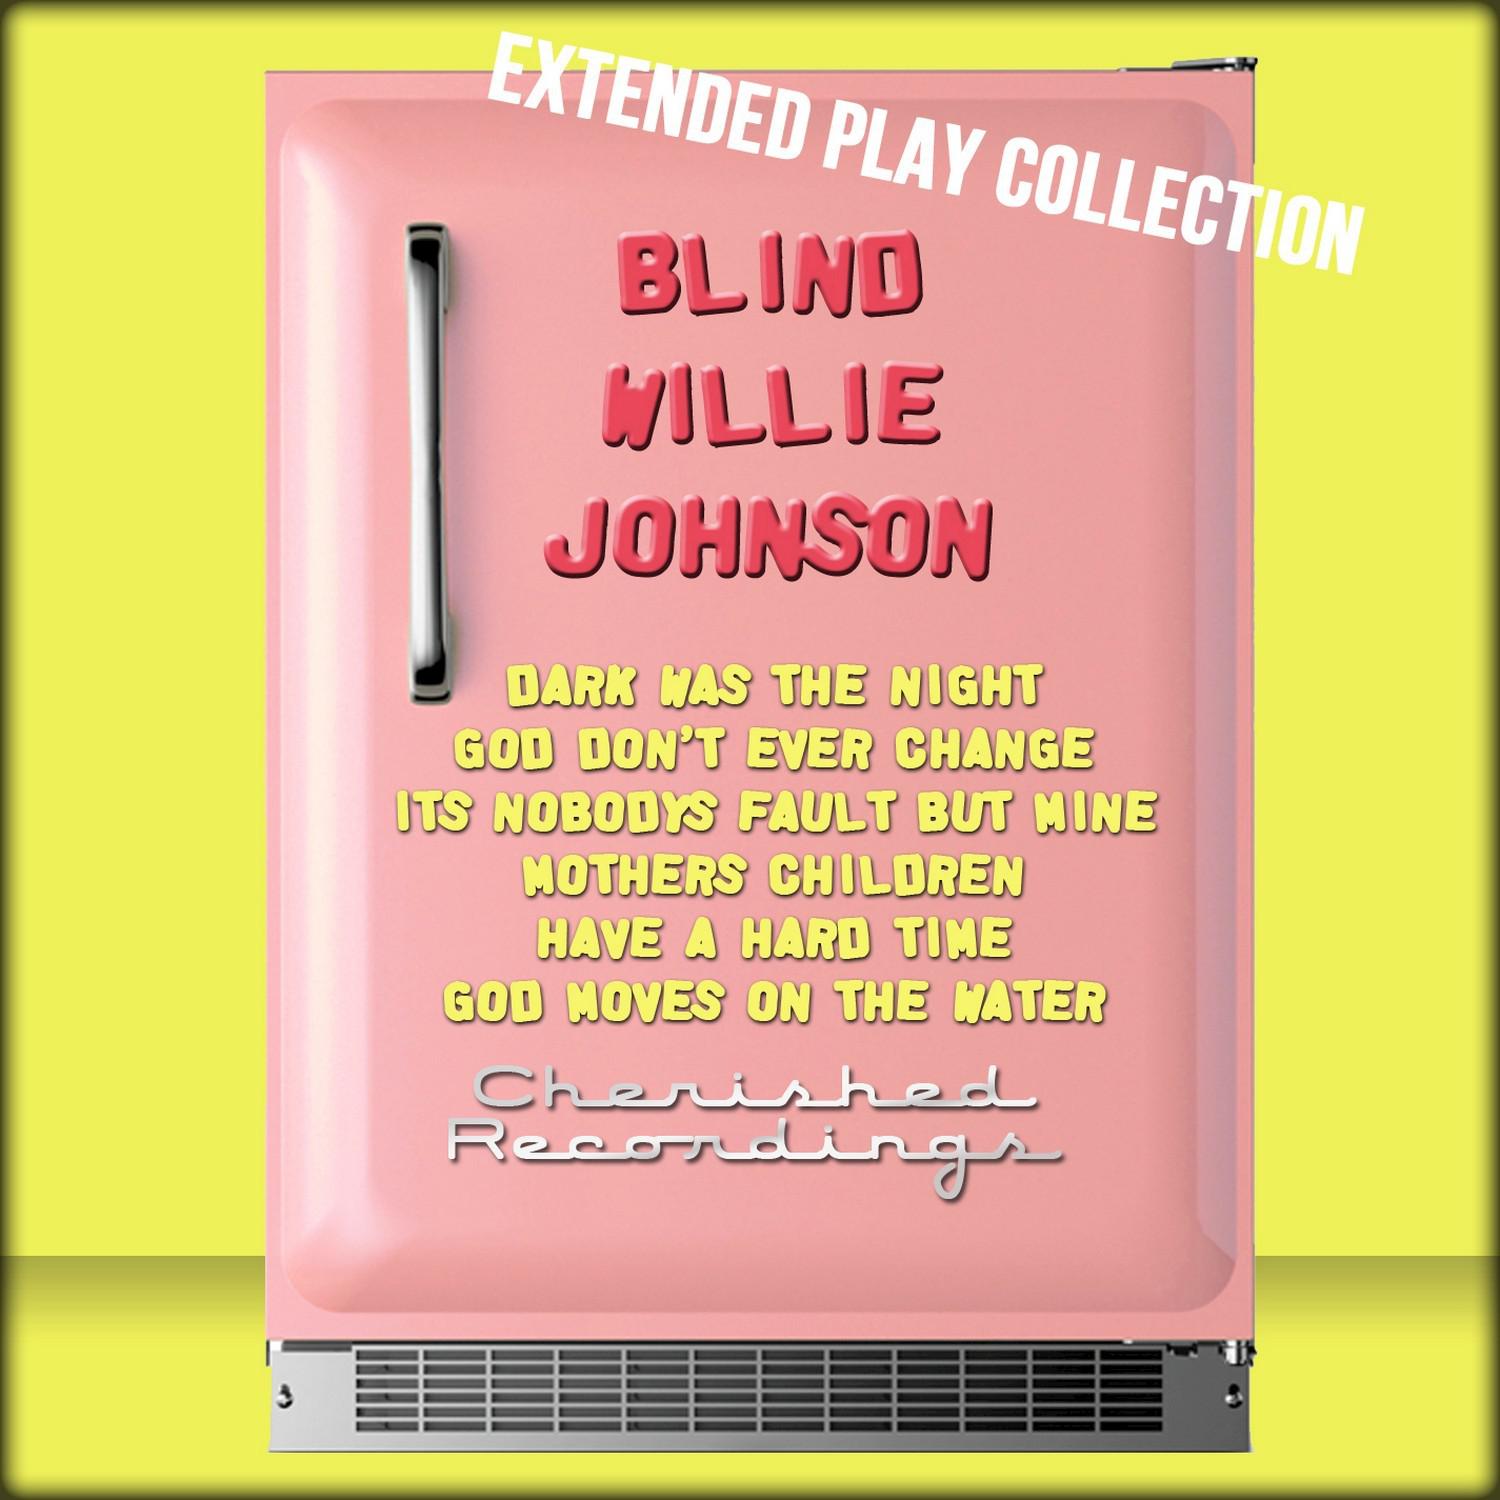 Blind Willie Johnson: The Extended Play Collection